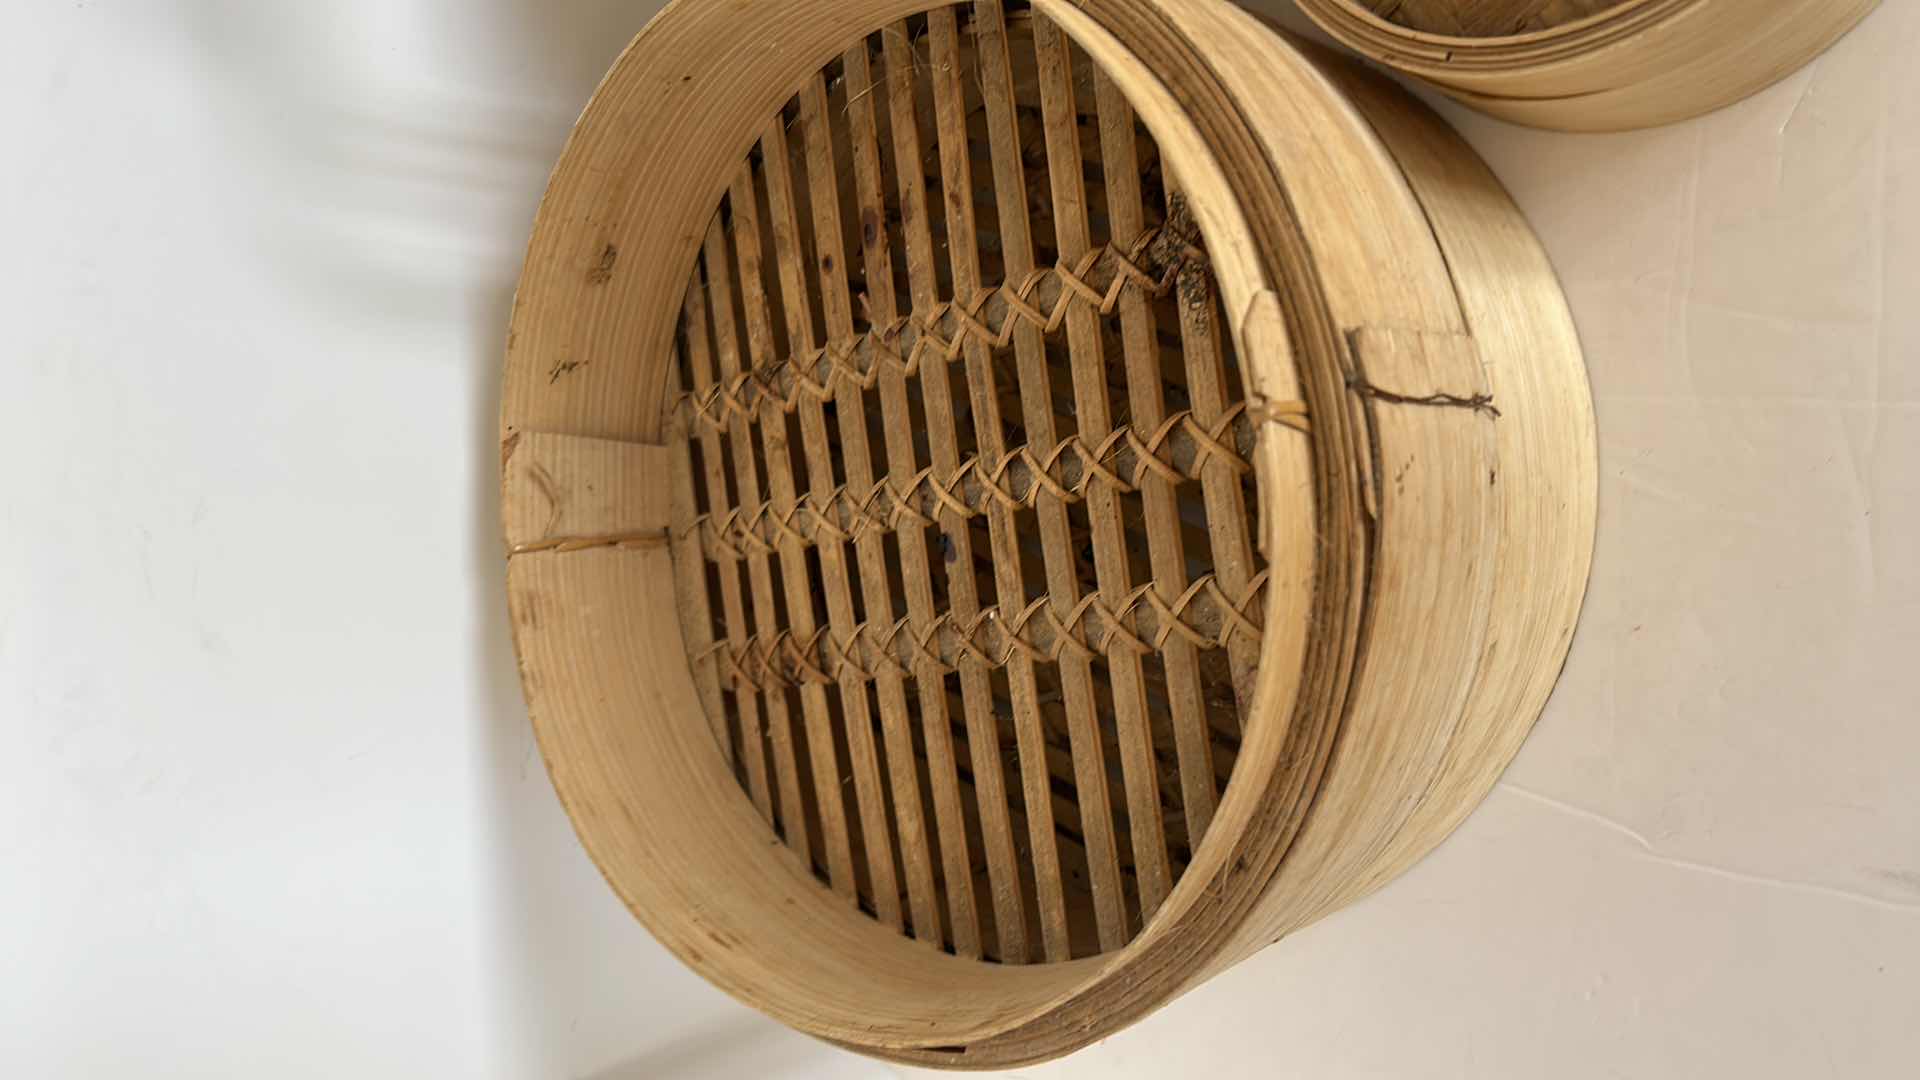 Photo 5 of 3 - CHINESE WICKER VEGTABLE STEAMING BASKETS.  LARGEST 10 1/2” x 7”